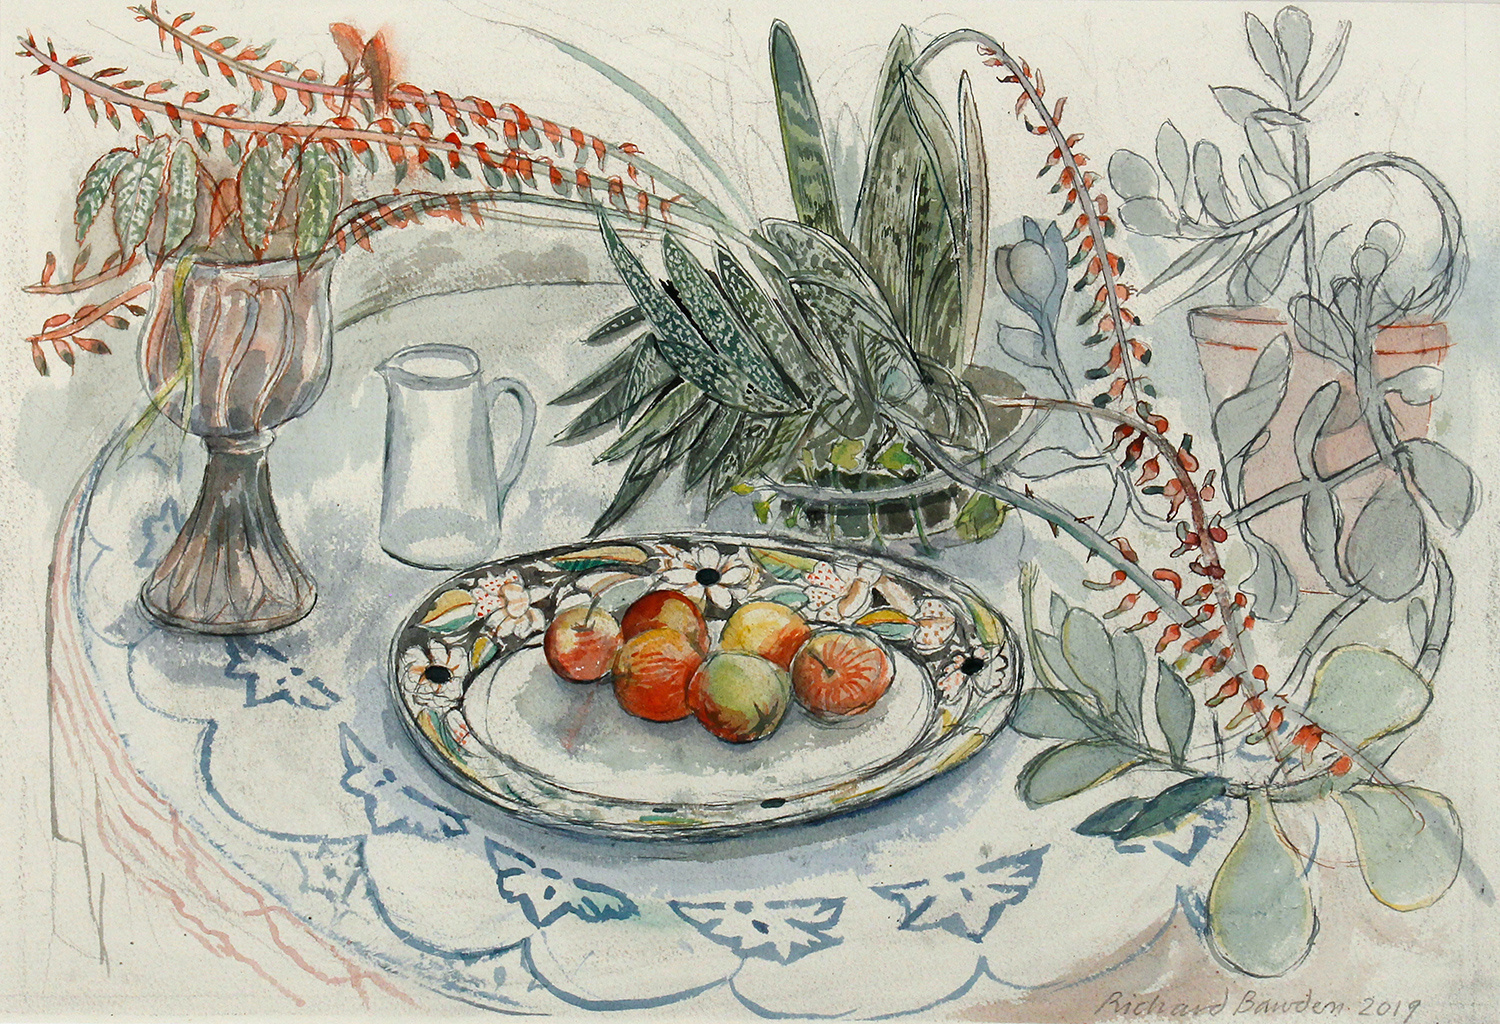 Apples and Cacti by Richard Bawden